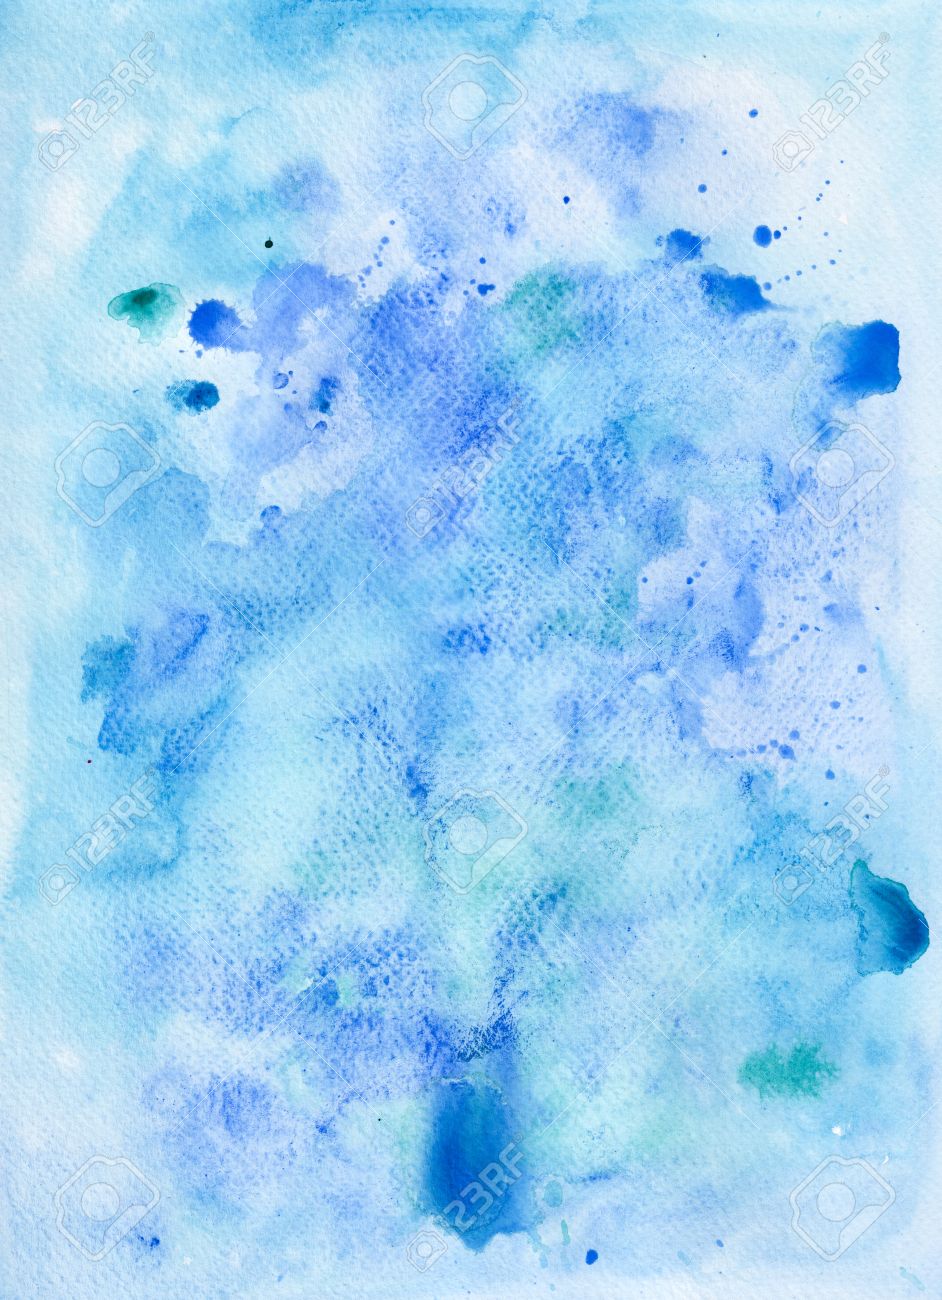 Abstract Light Blue Watercolor Background Watercolors Painting